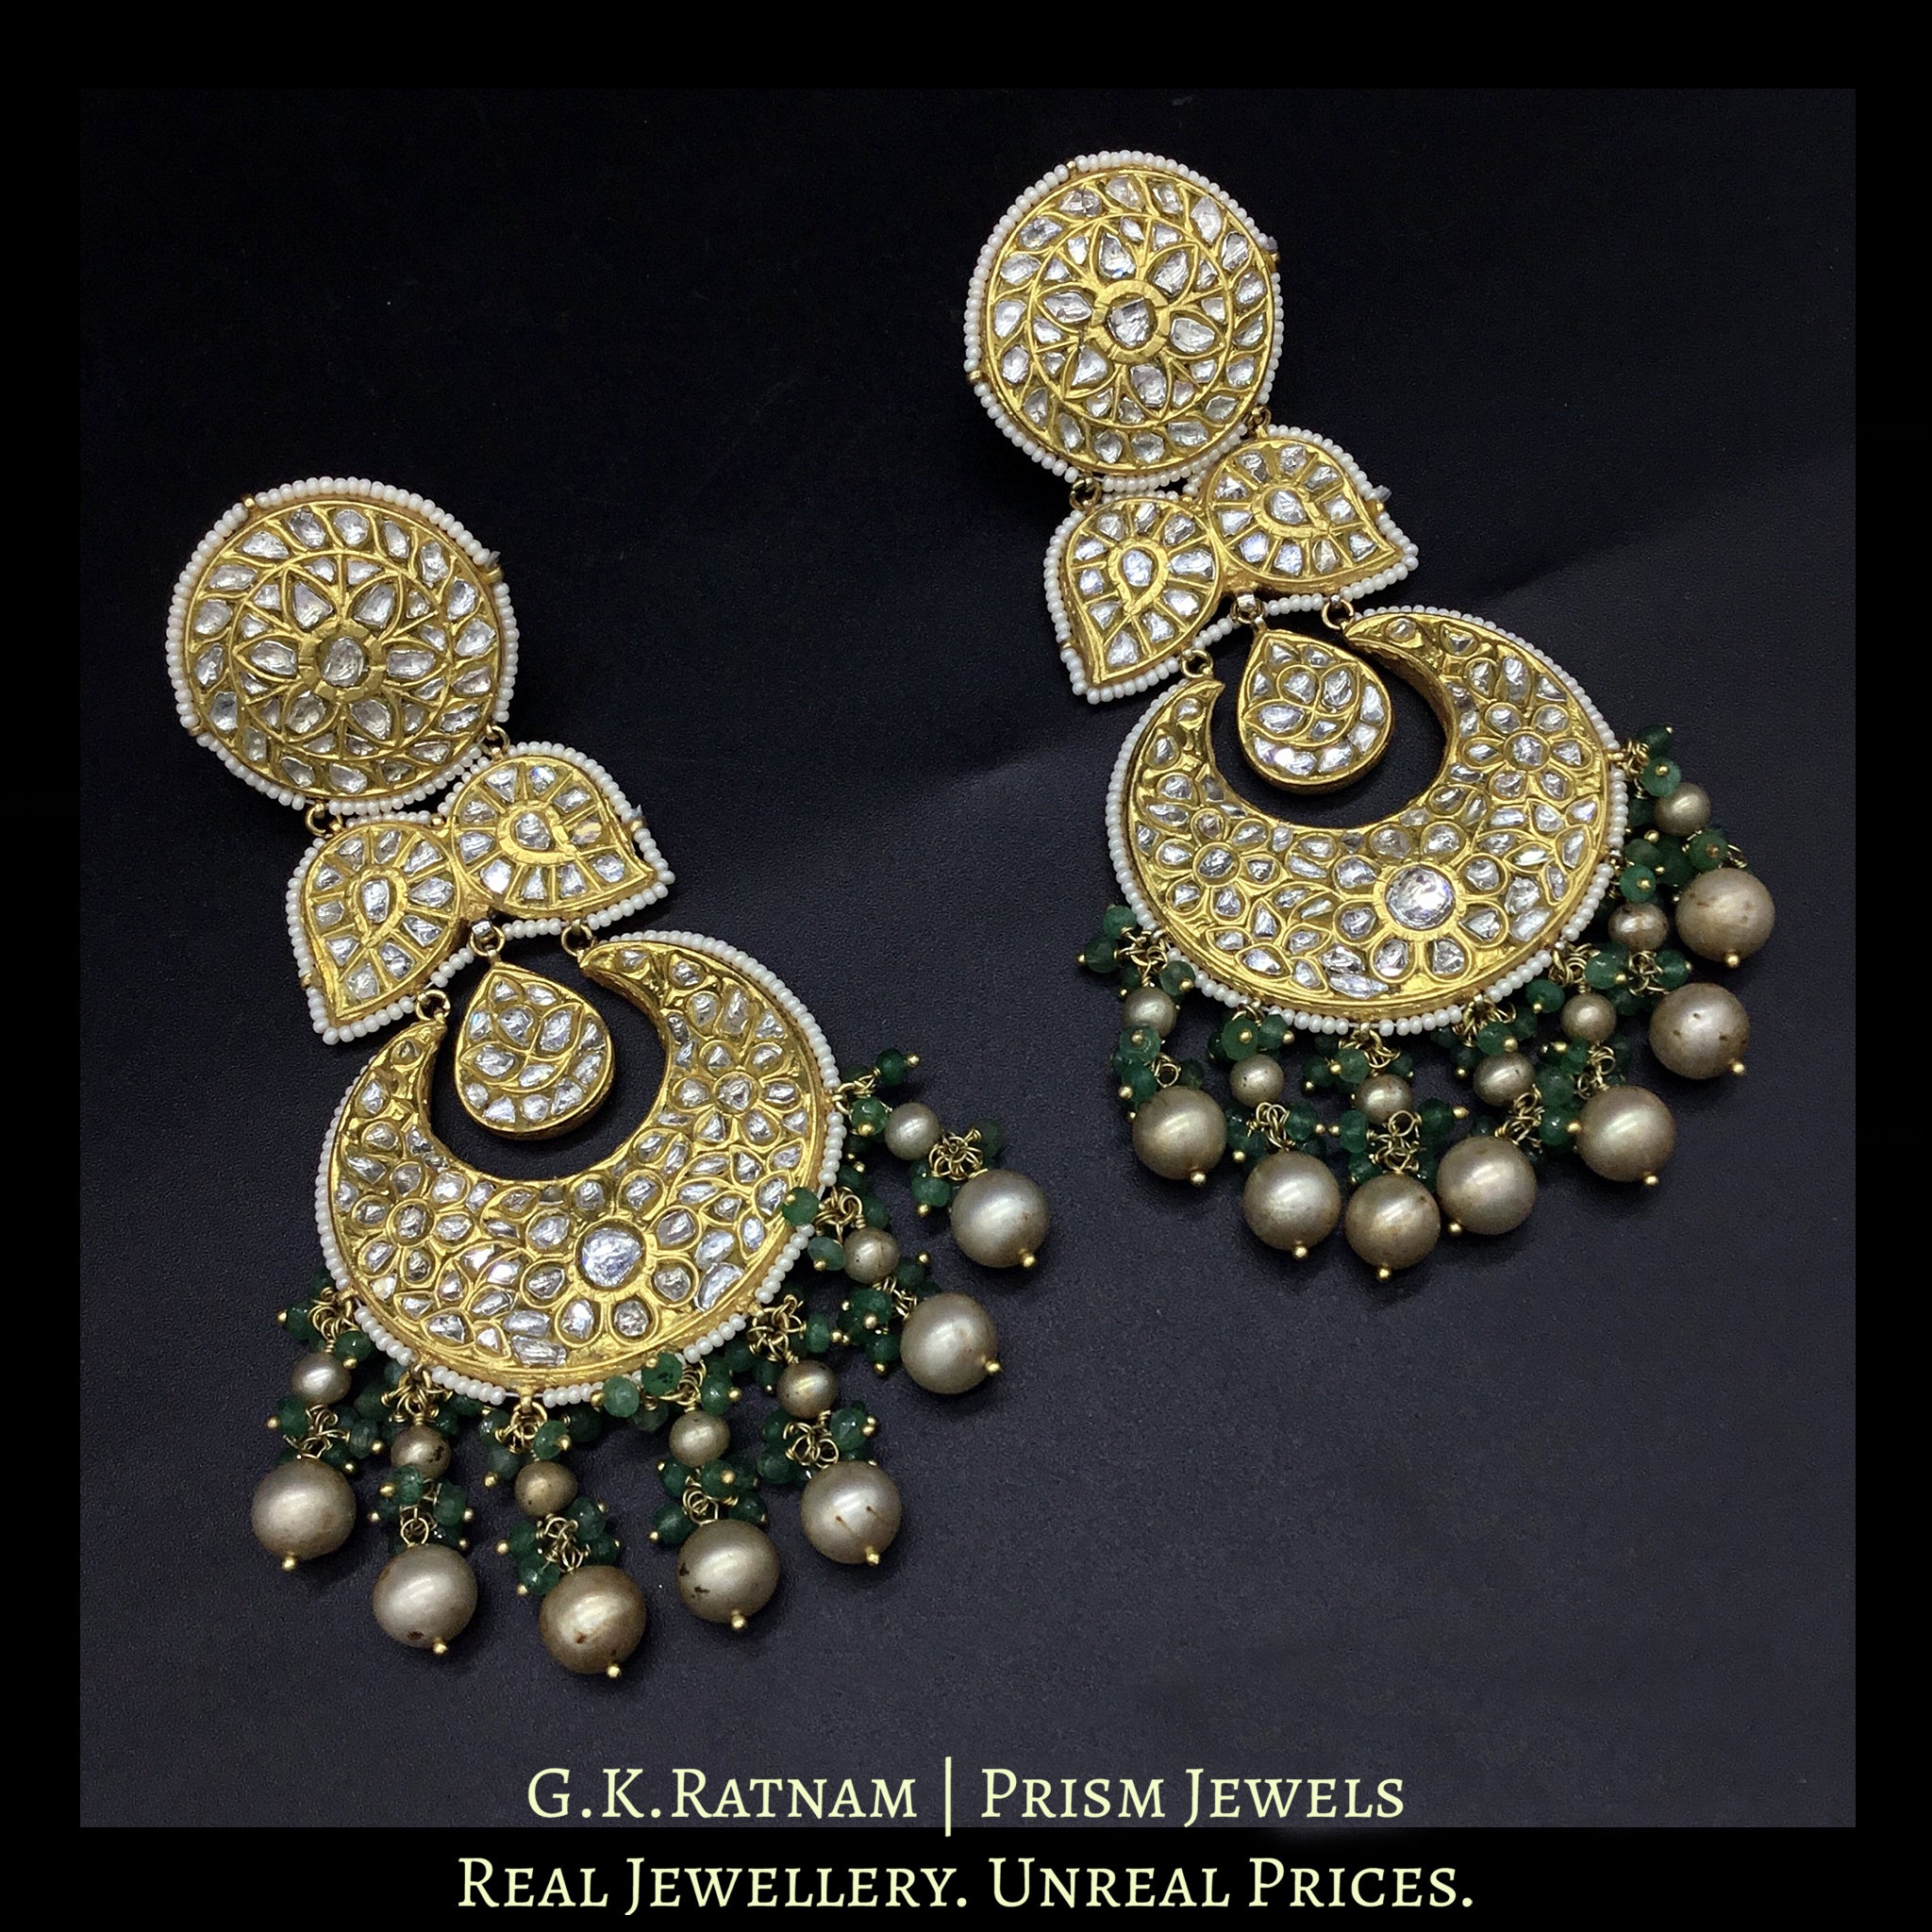 23k Gold and Diamond Polki Chand Bali Earring Pair with Antiqued freshwater pearls and emerald-grade beryls